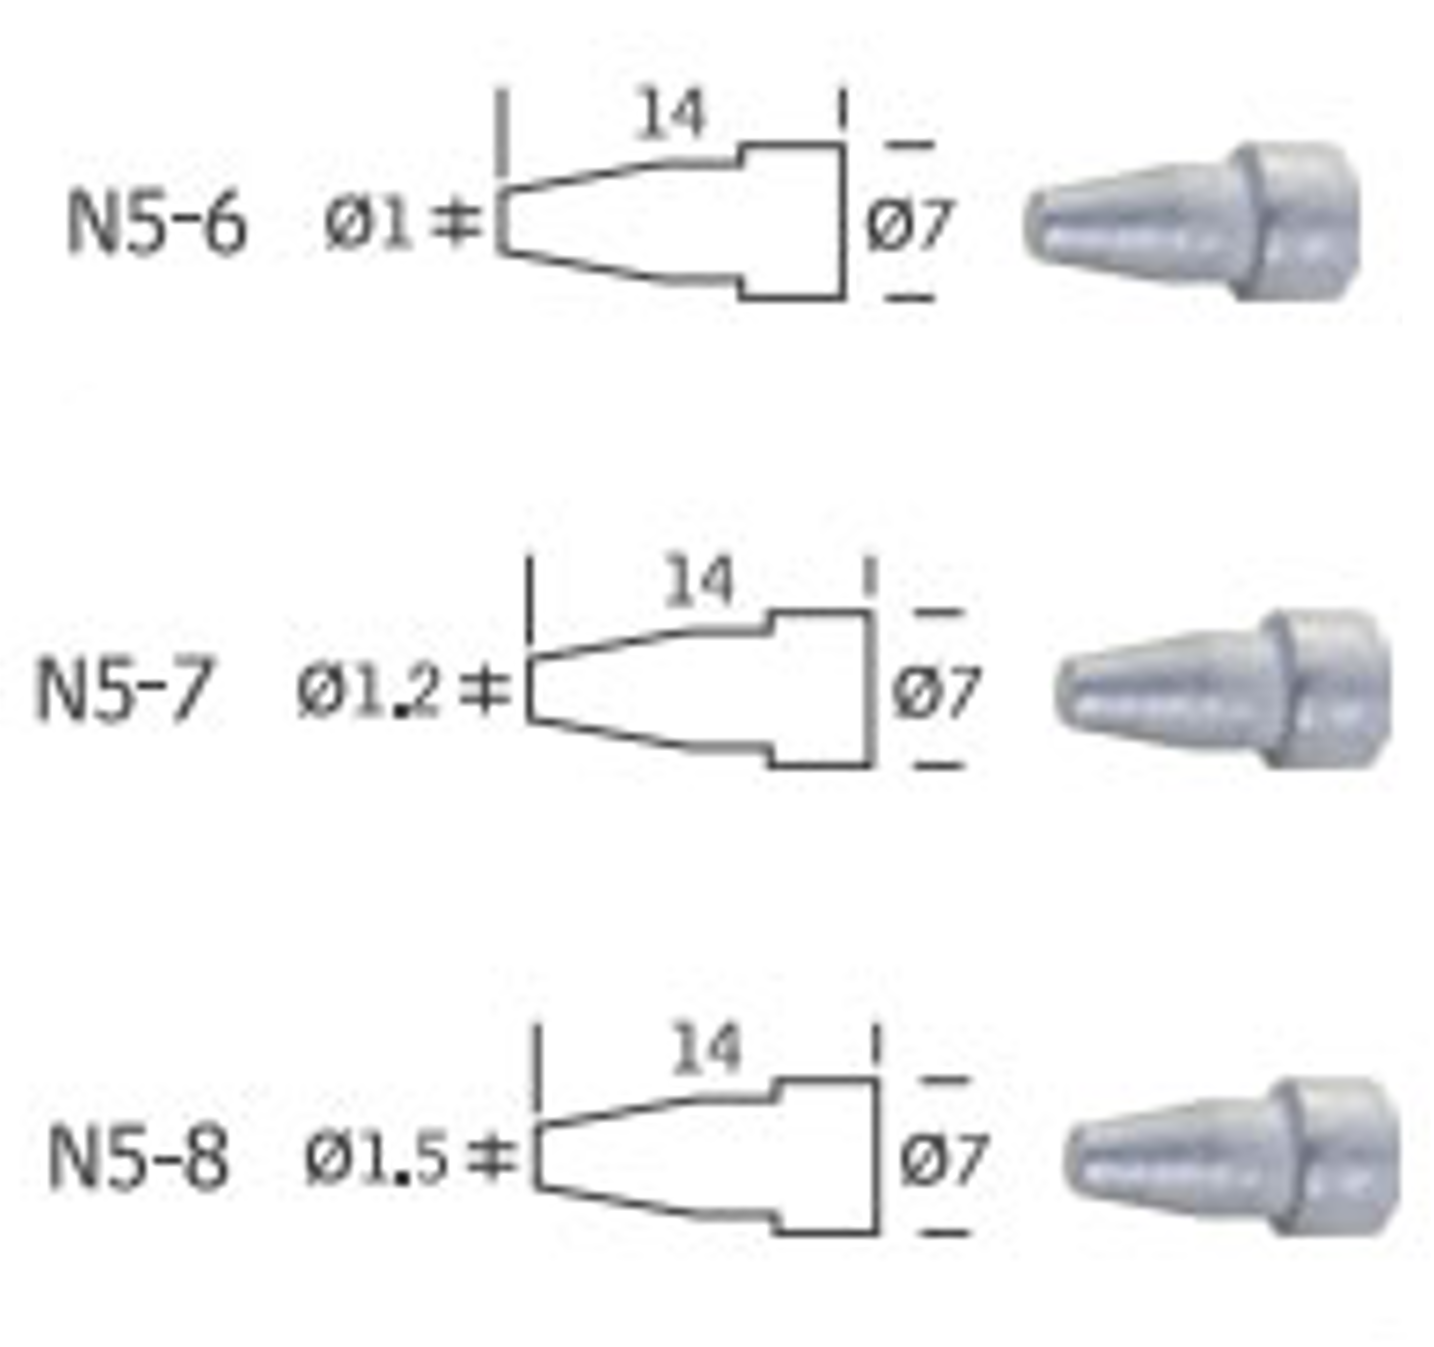 79-1576 N5-7 spare tip for ZD-8915, ZD-8917, 88-552B